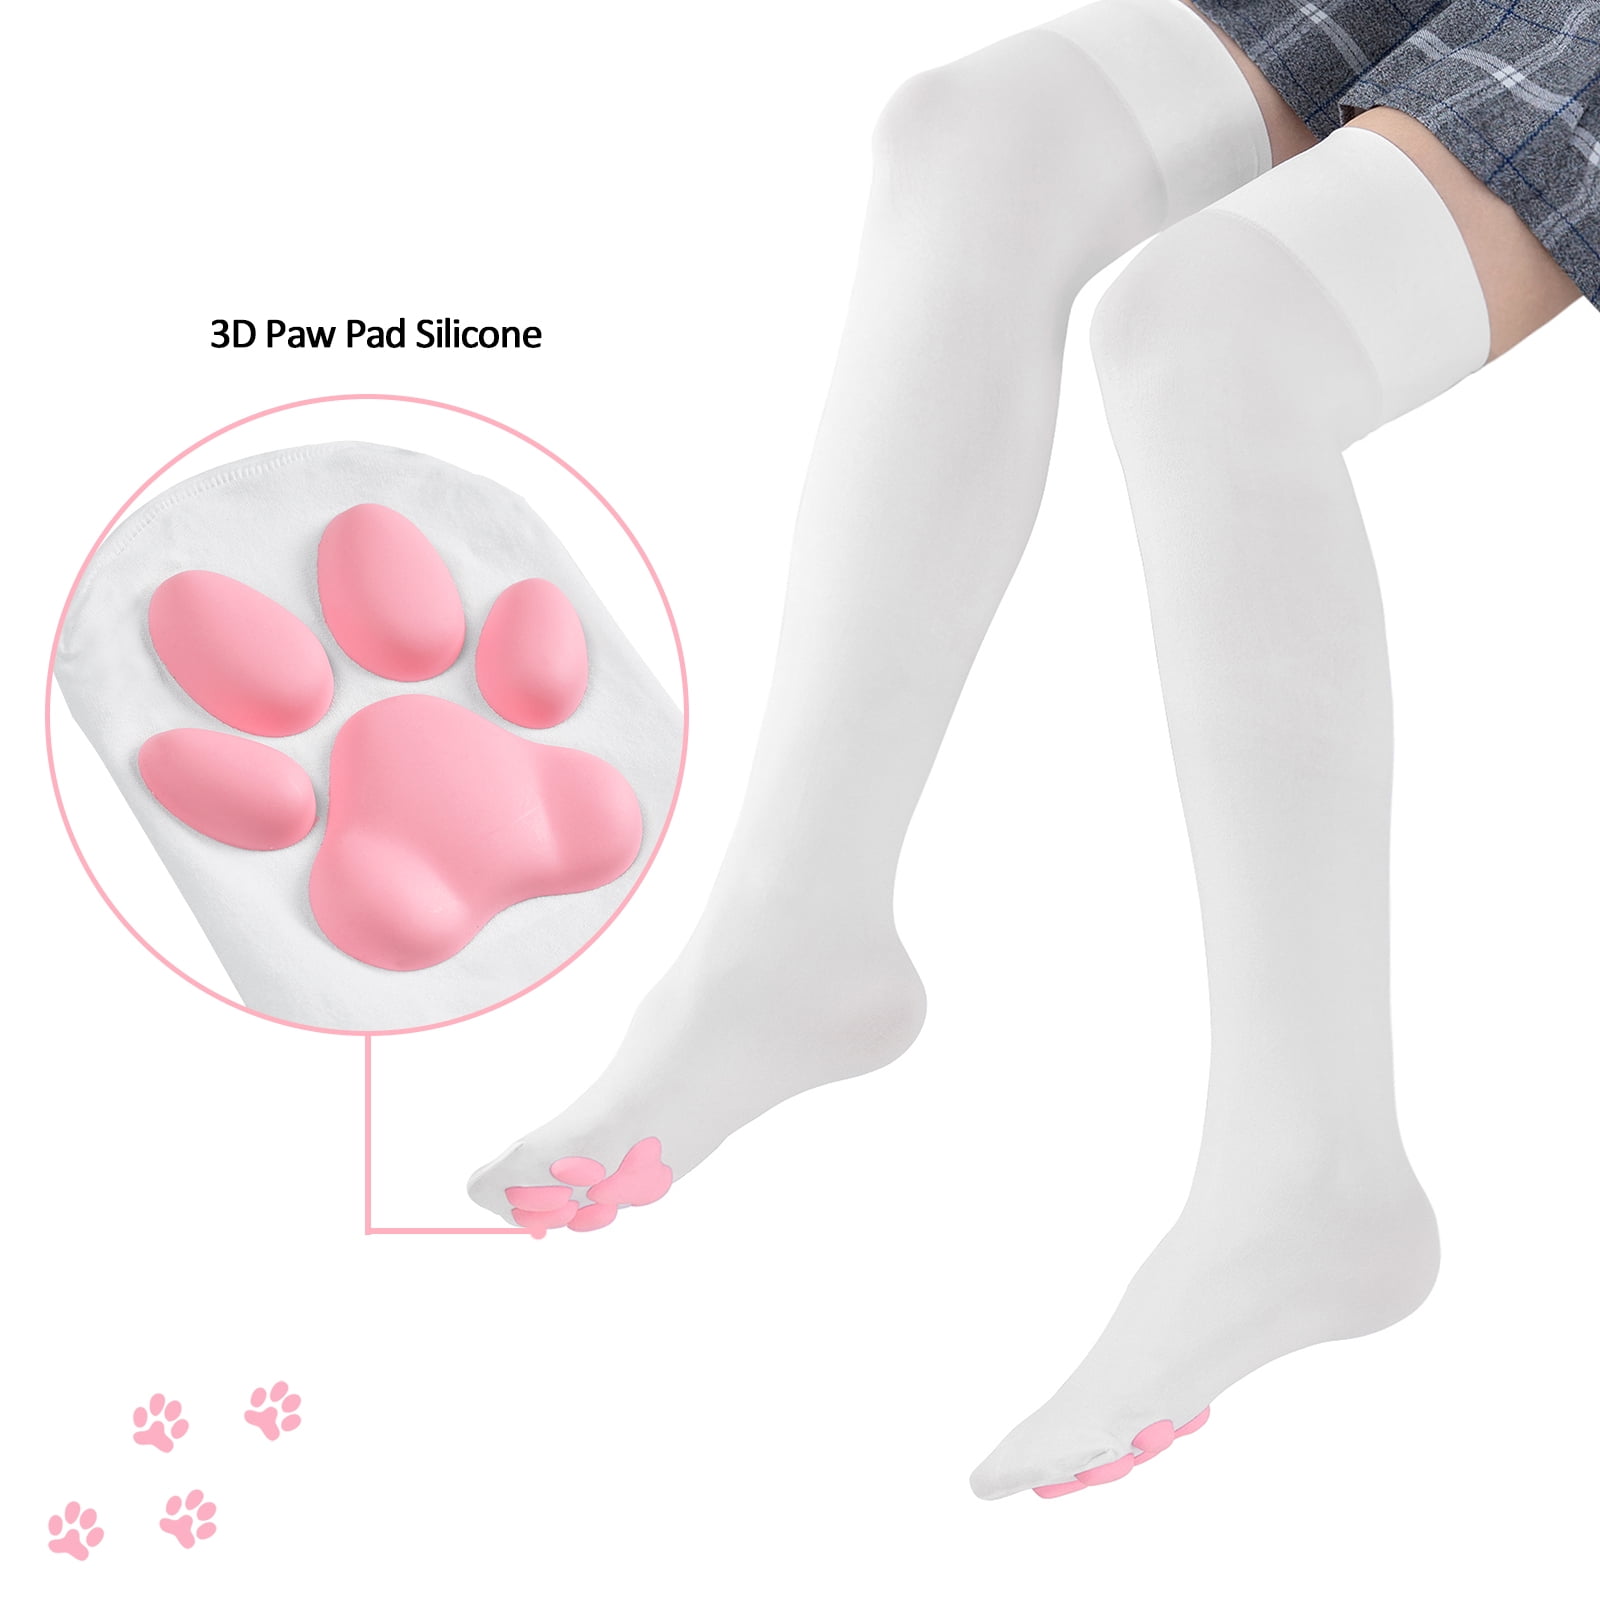 【In Stock】DokiDoki Cosplay Accessories Silicone Foot Pads Pain Relief Invisible Foot Pads, Red / L(EU40-43)